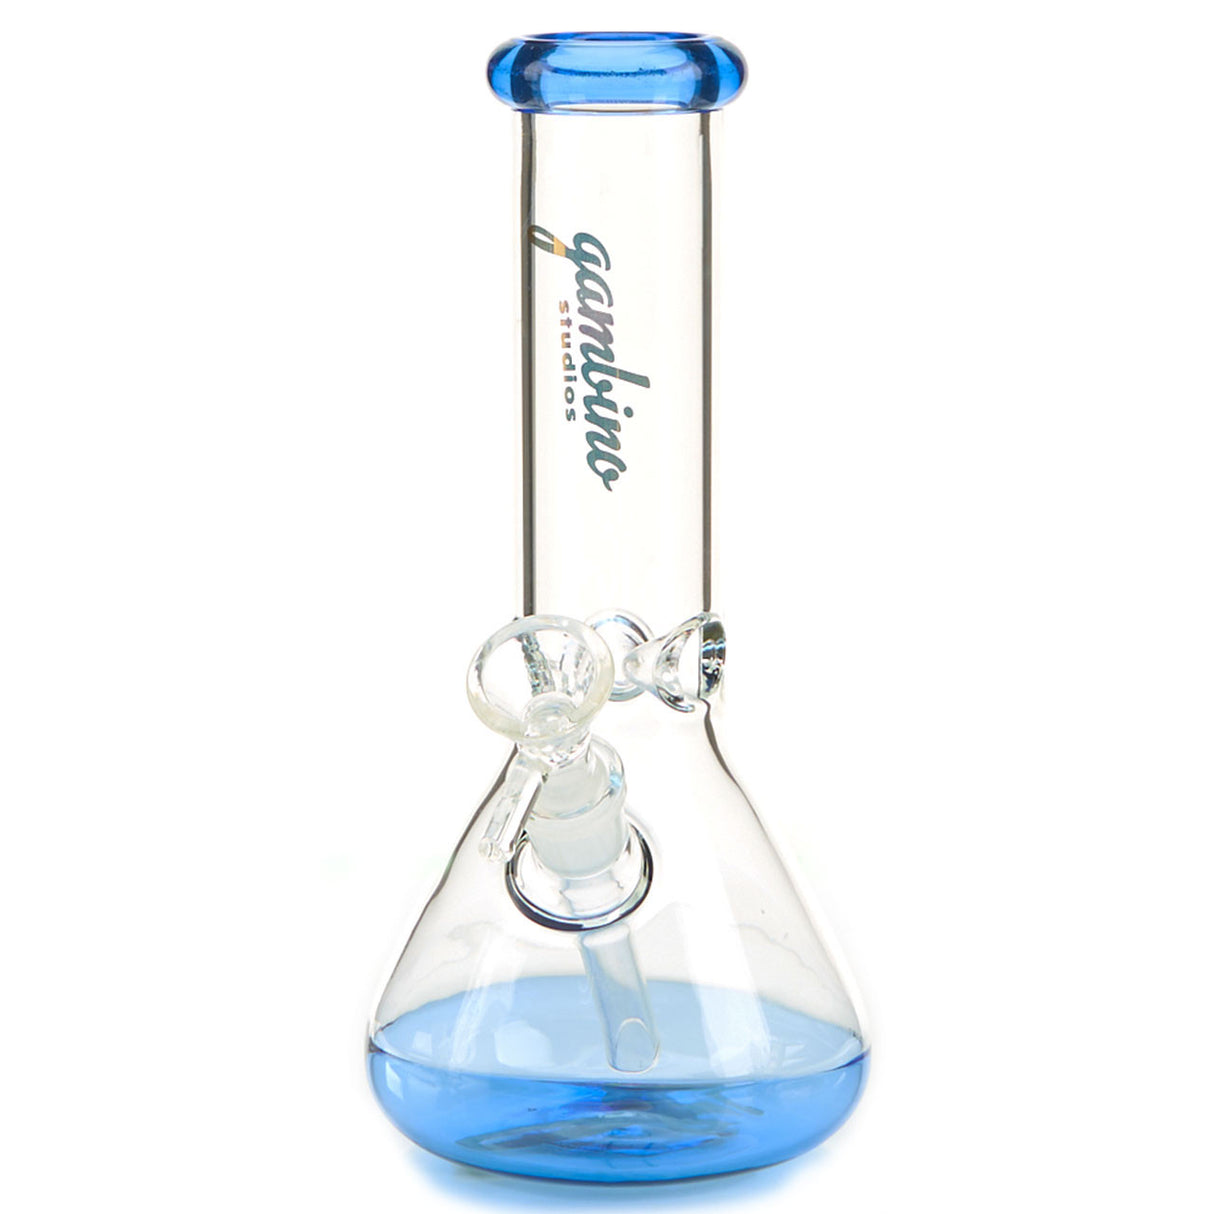 Gambino Studios The 45 Beaker Base Water Pipe with colored base and mouthpiece